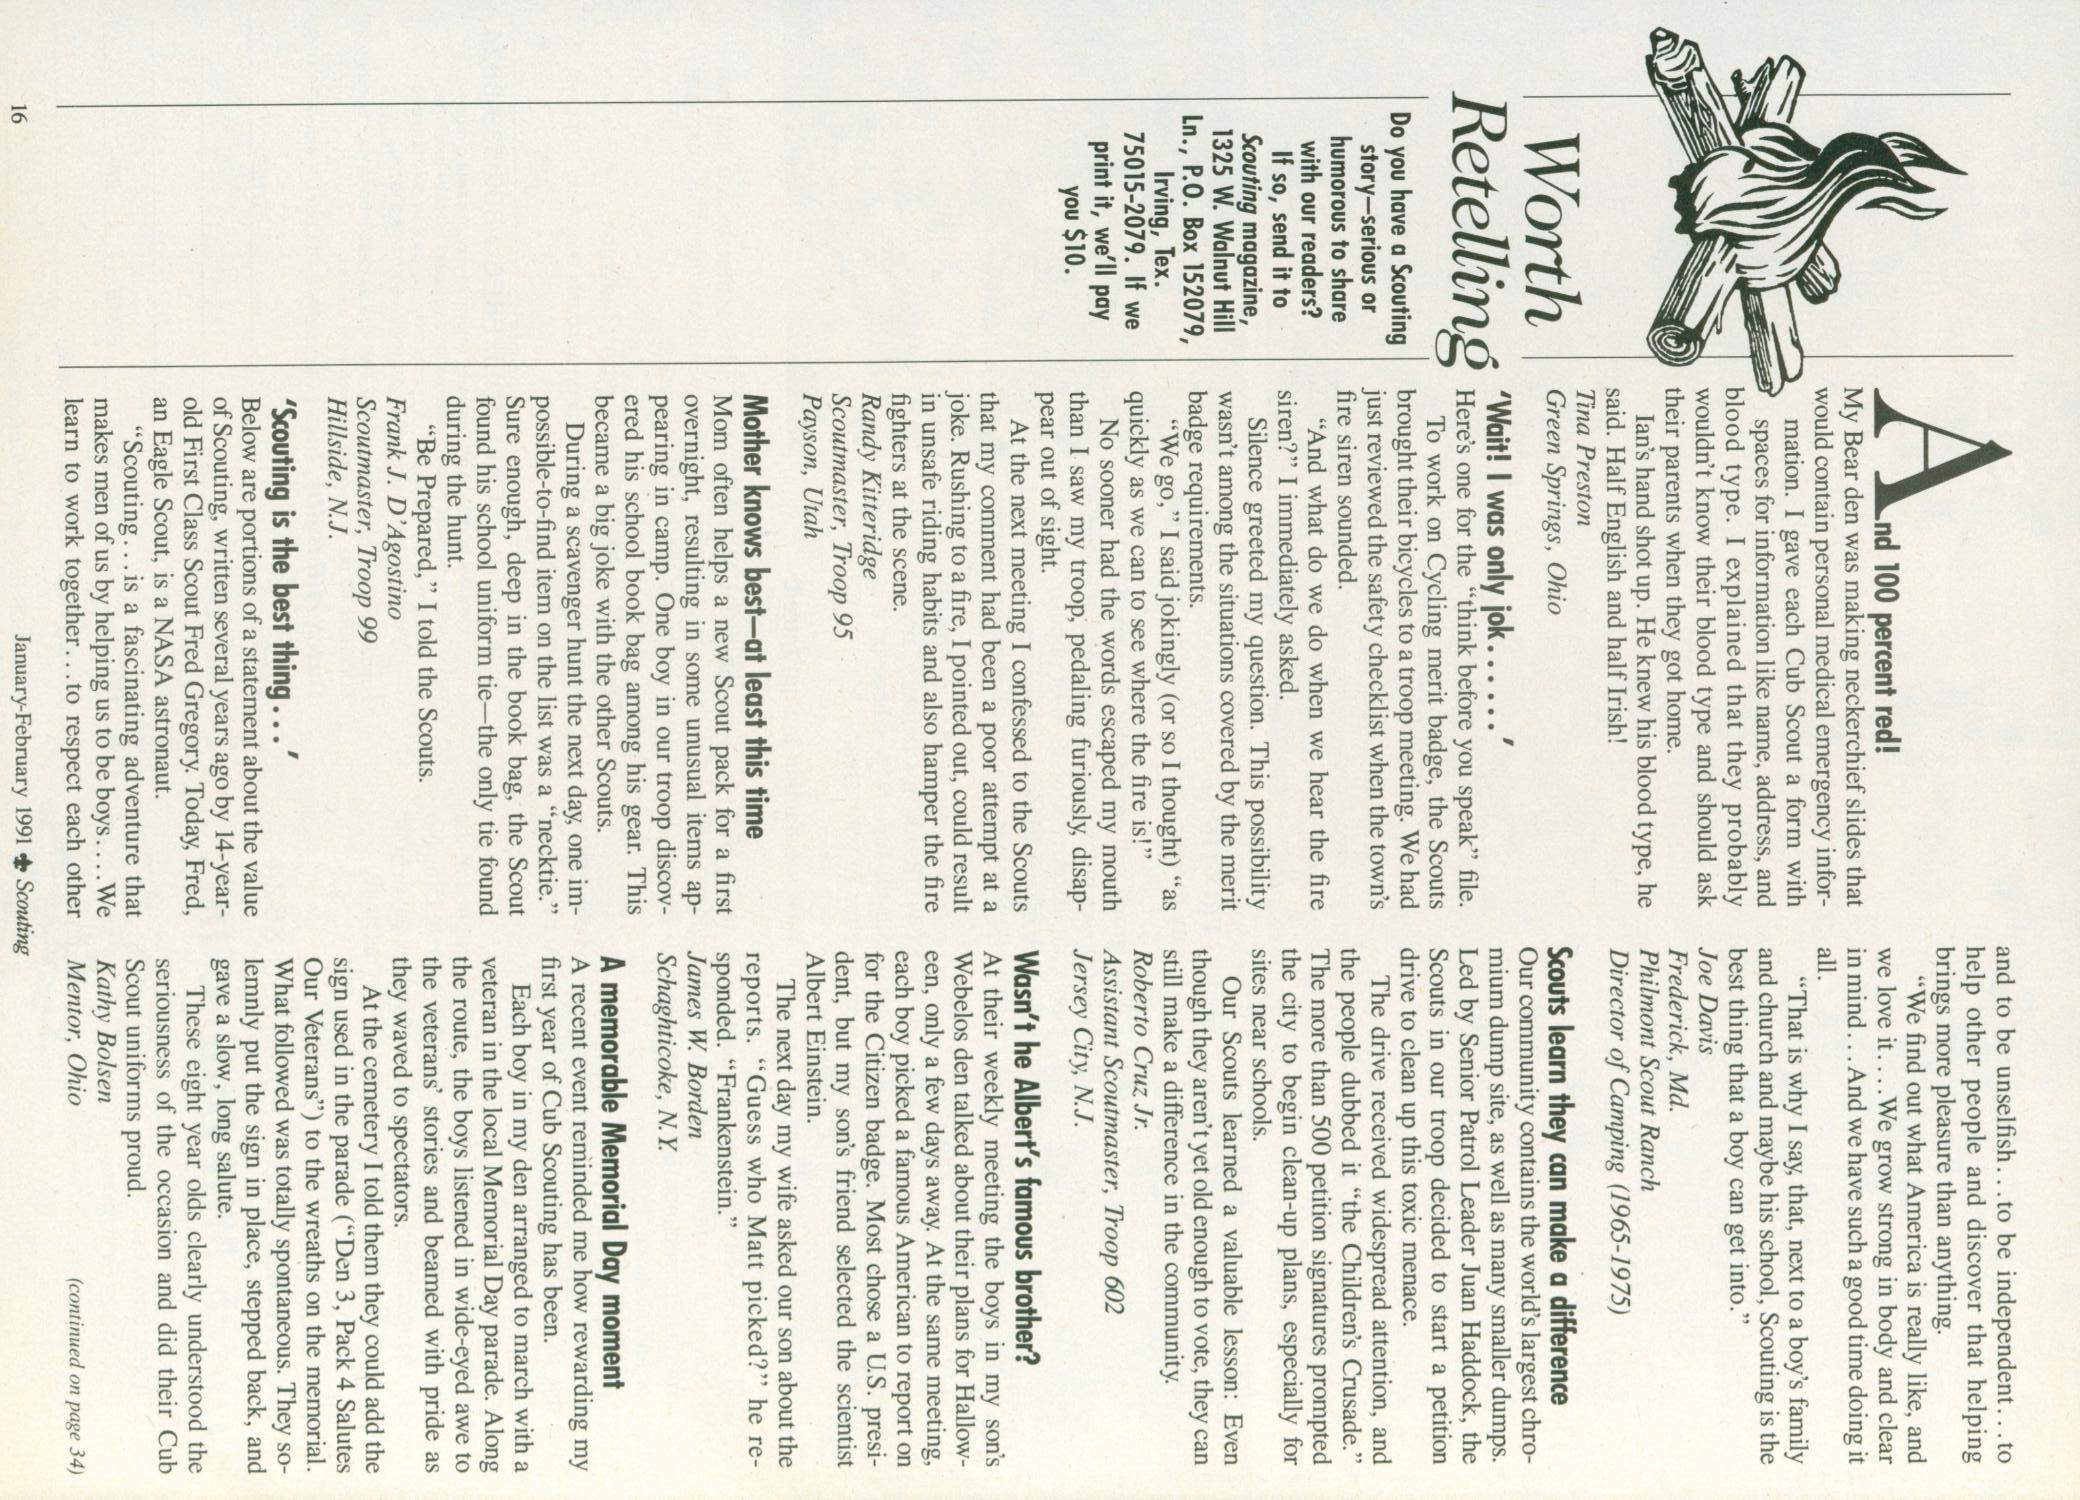 Scouting, Volume 79, Number 1, January-February 1991
                                                
                                                    16
                                                